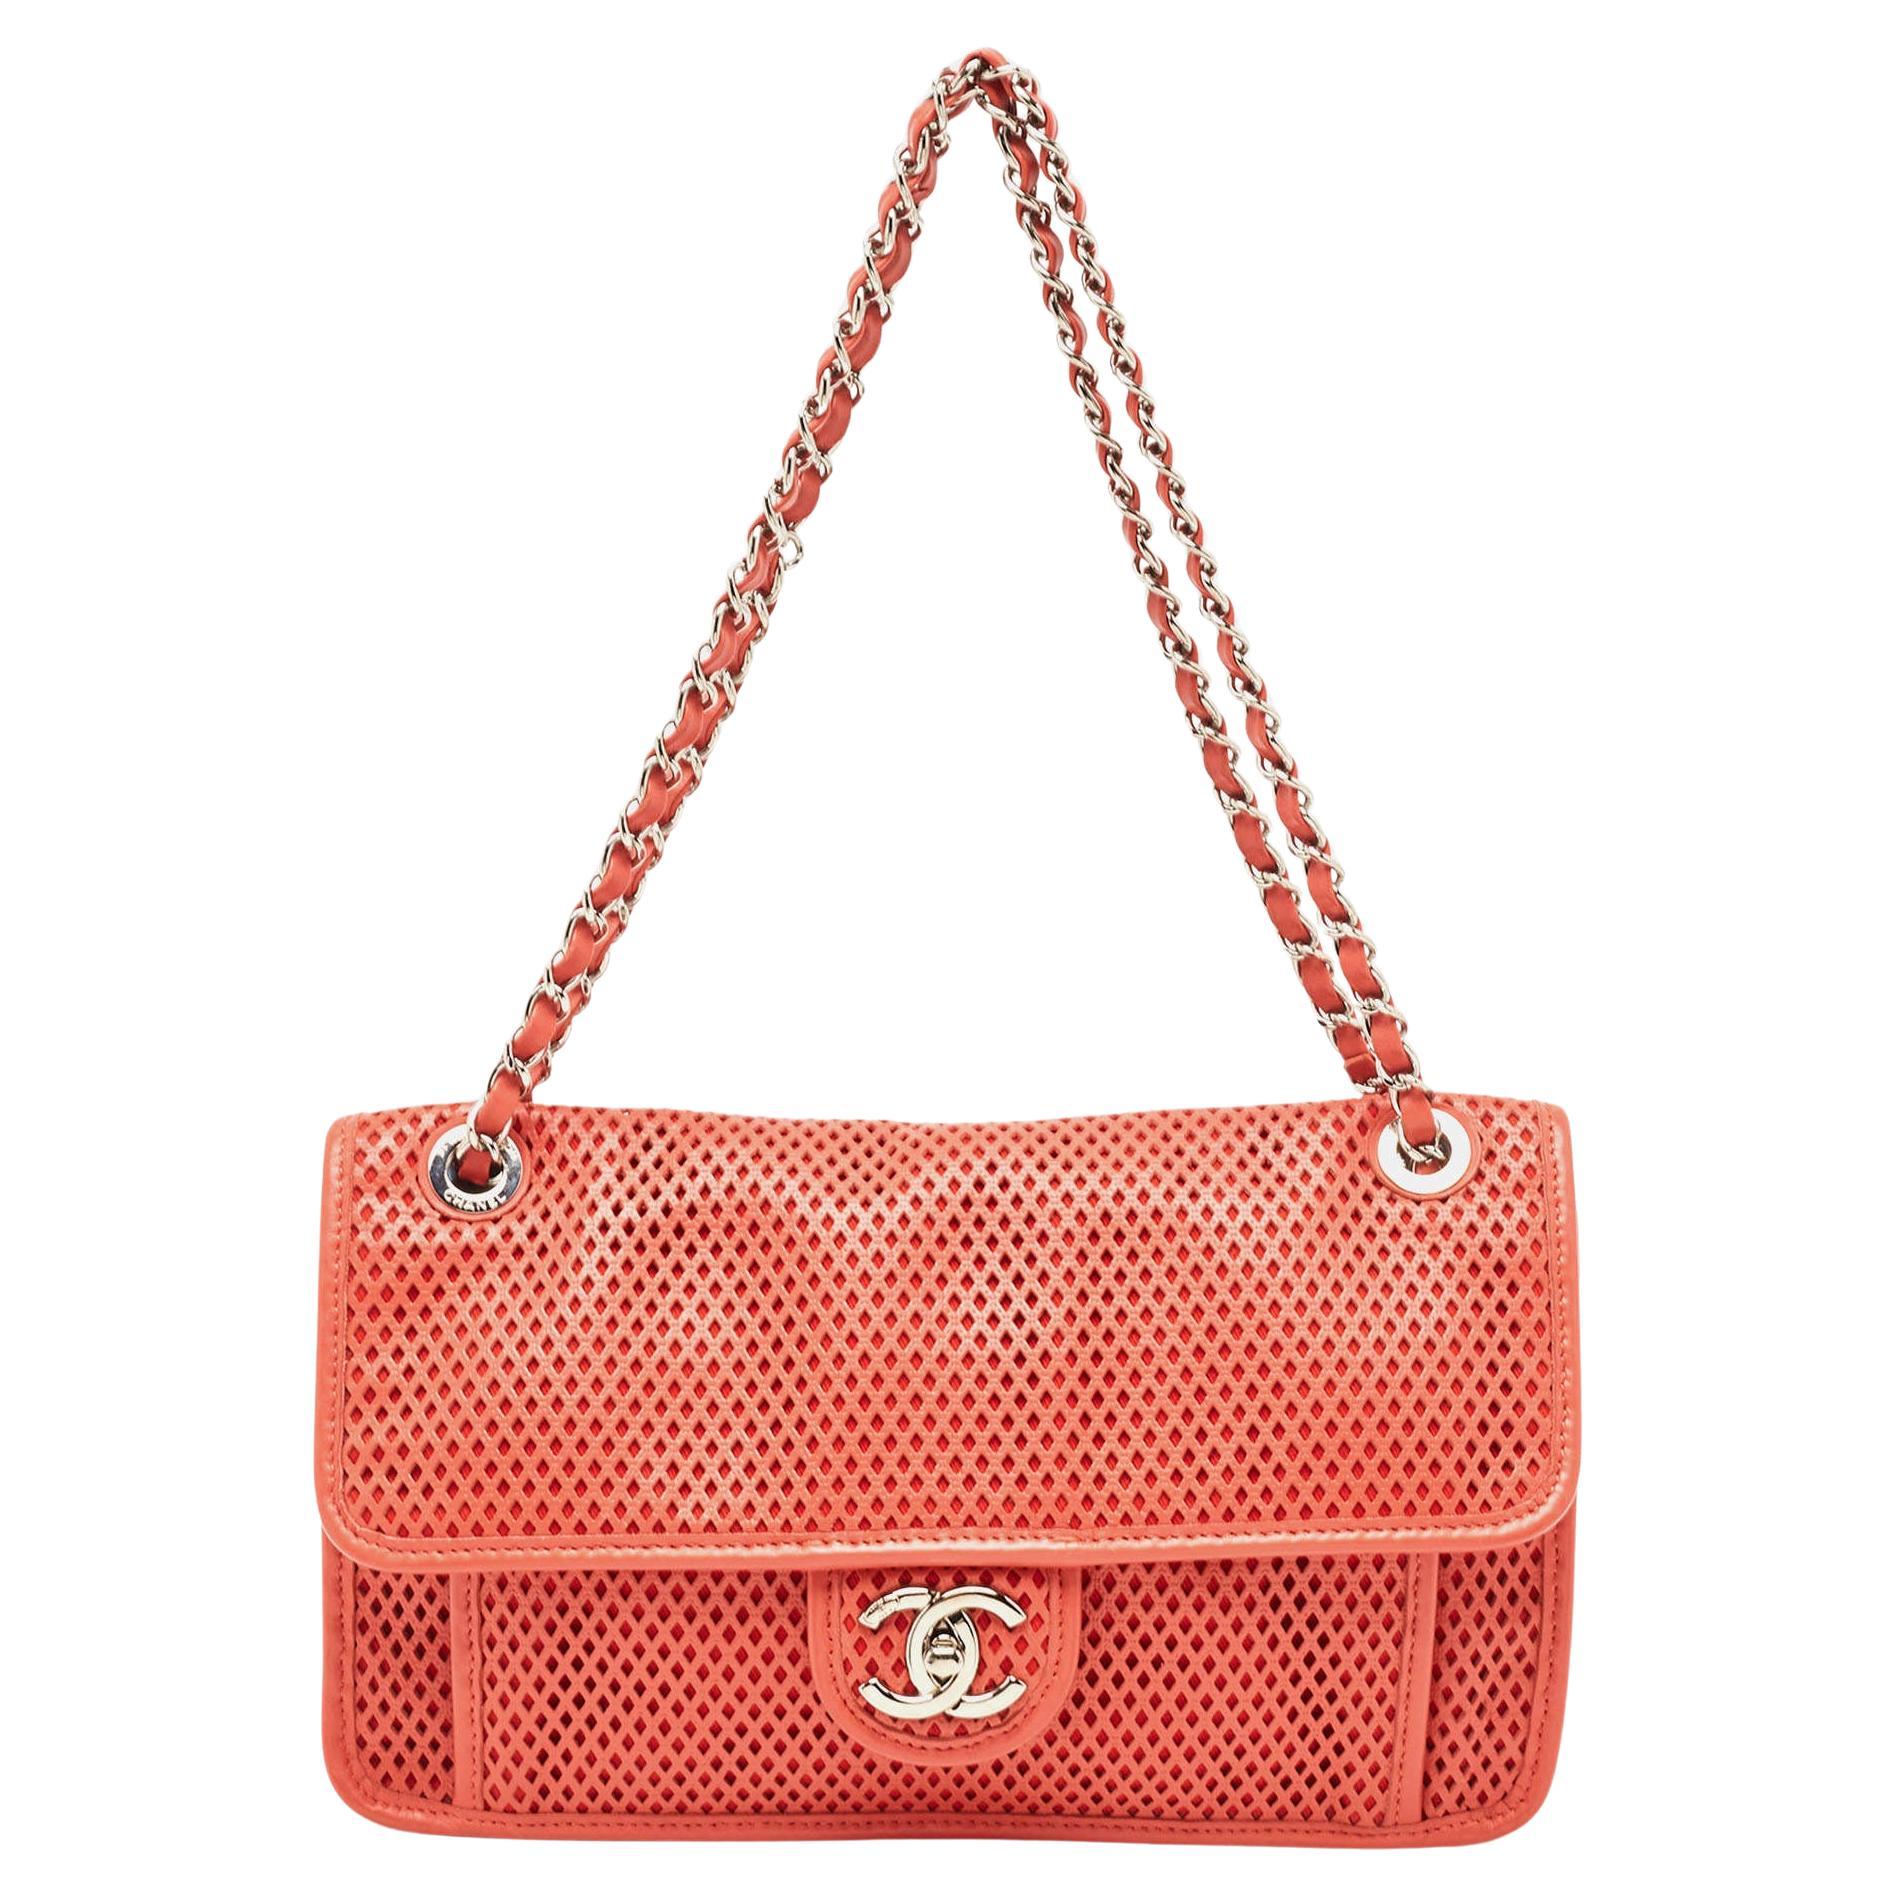 Chanel Red Perforated Leather Up in the Air Flap Bag For Sale